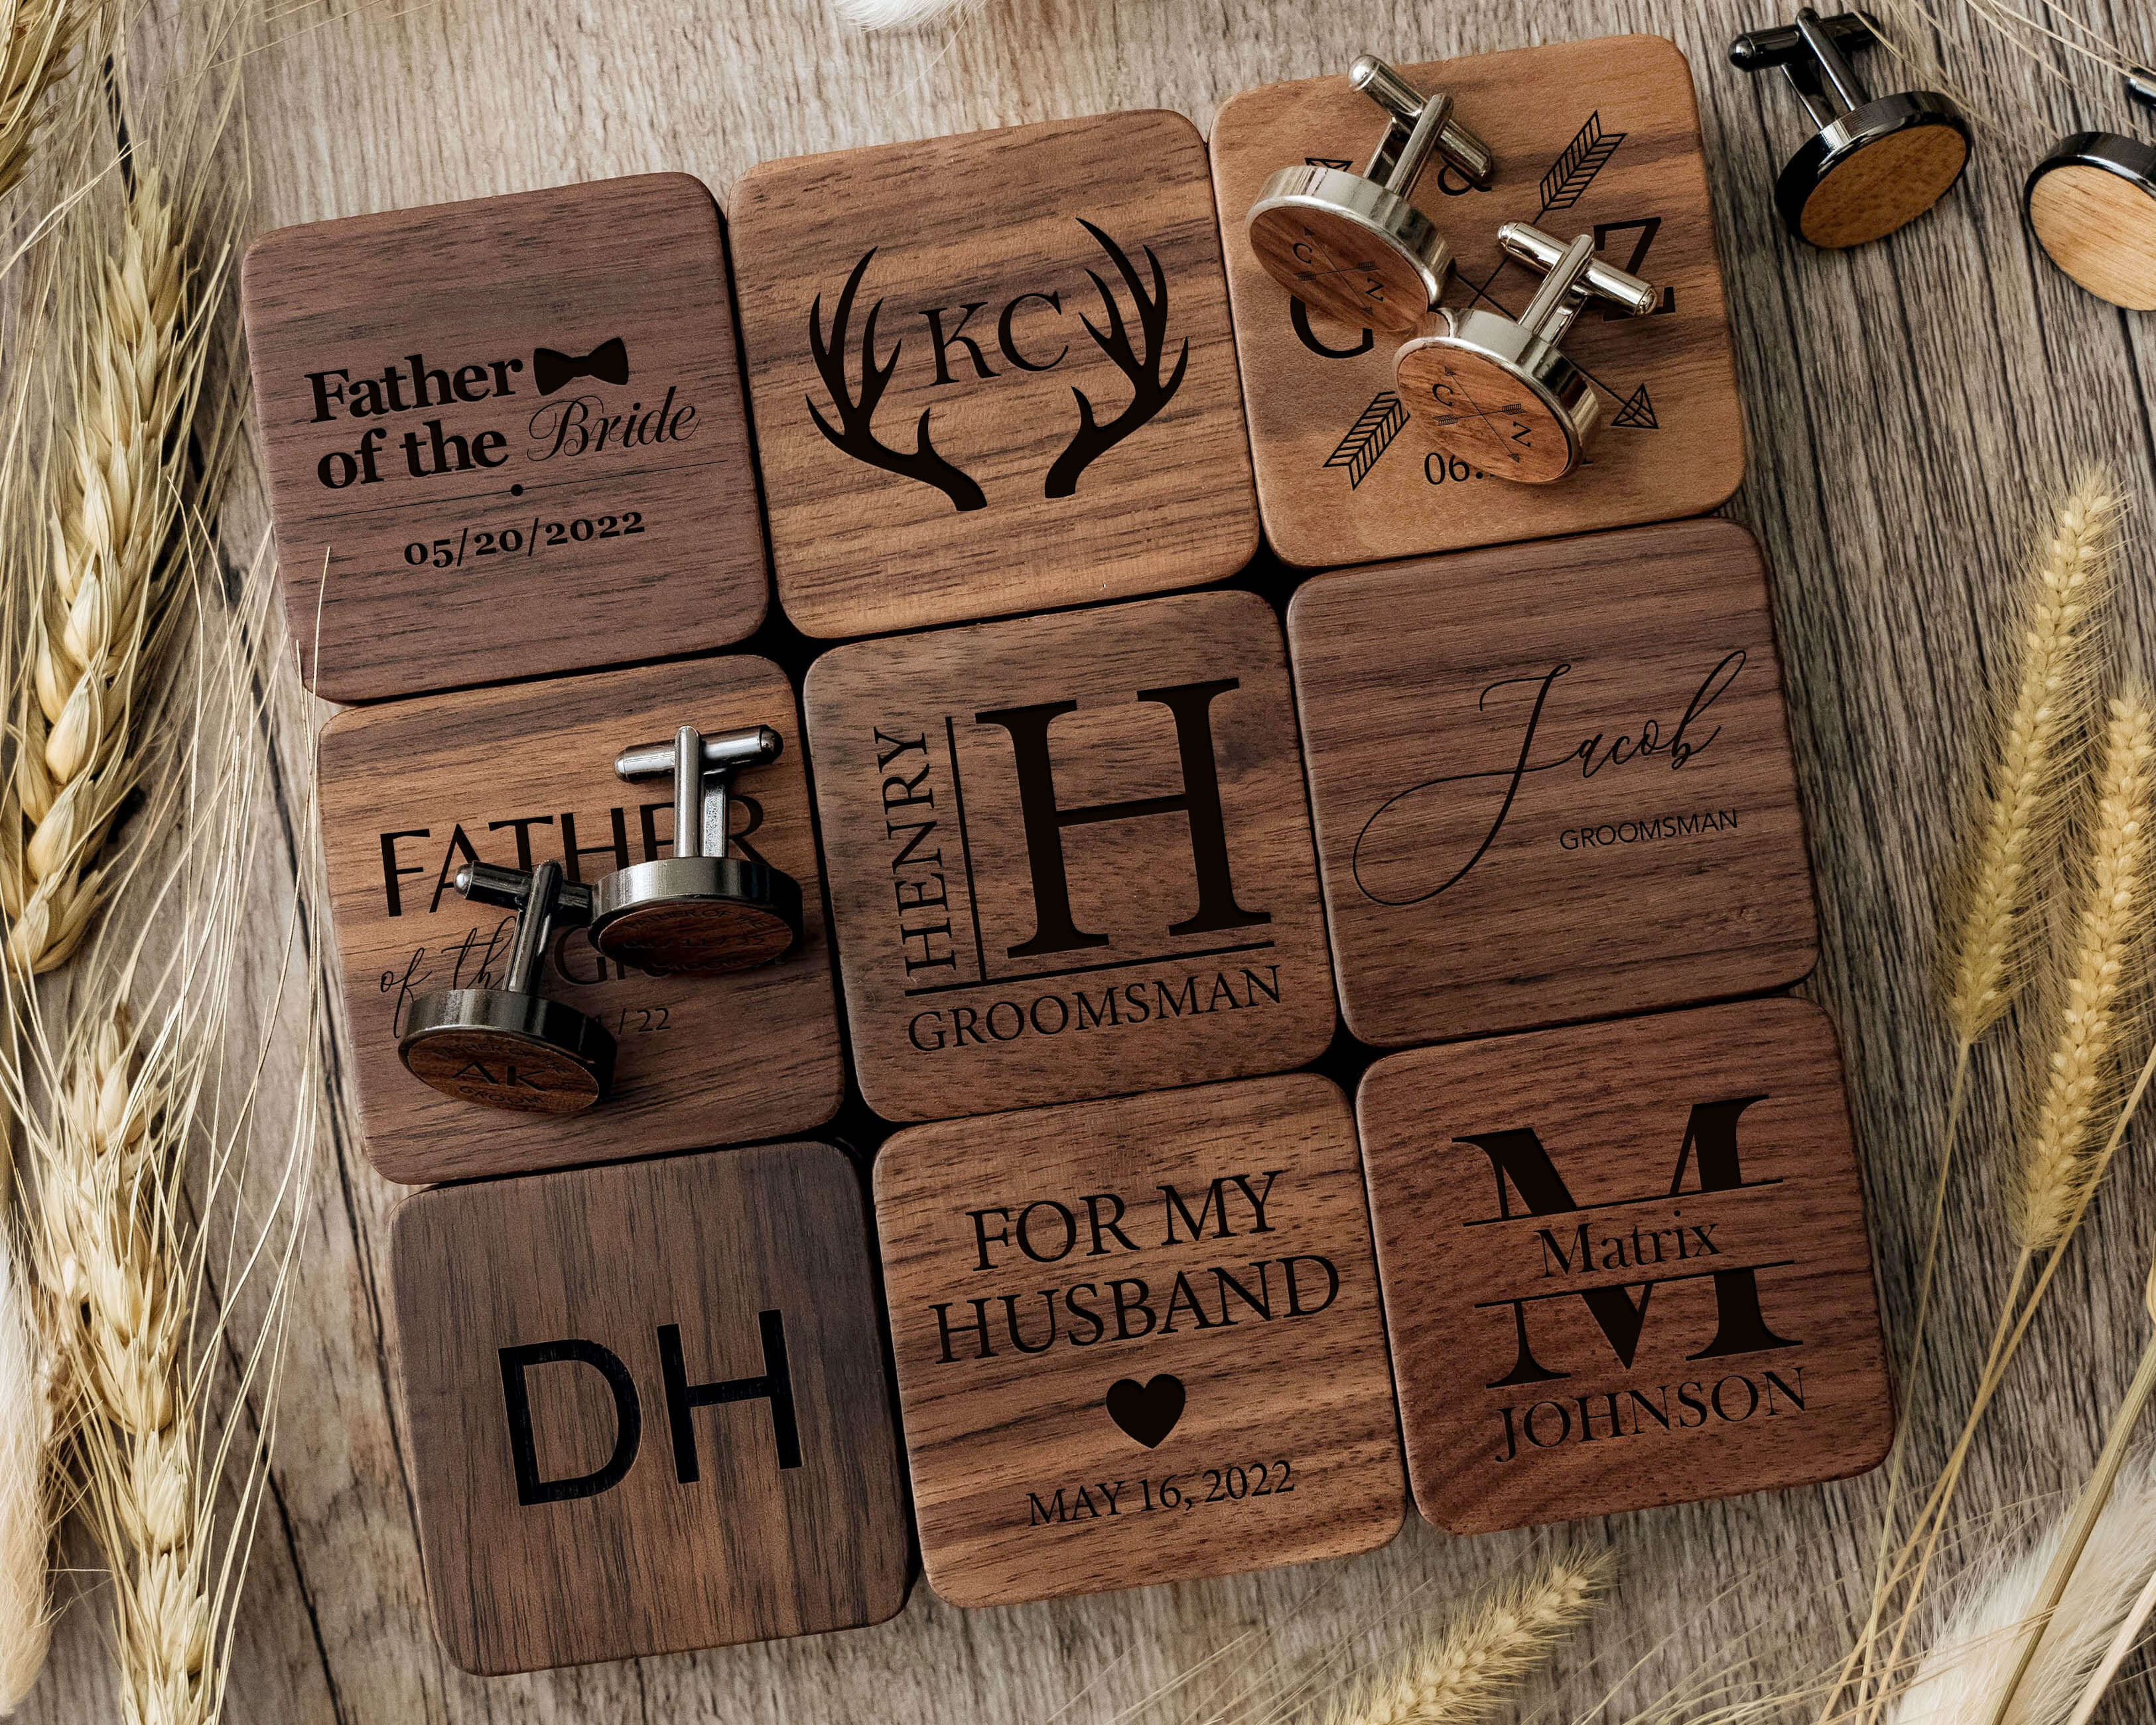 9 designs of Personalized Wooden Cufflinks with initials and name, prefect for Groomsmen Gifts.